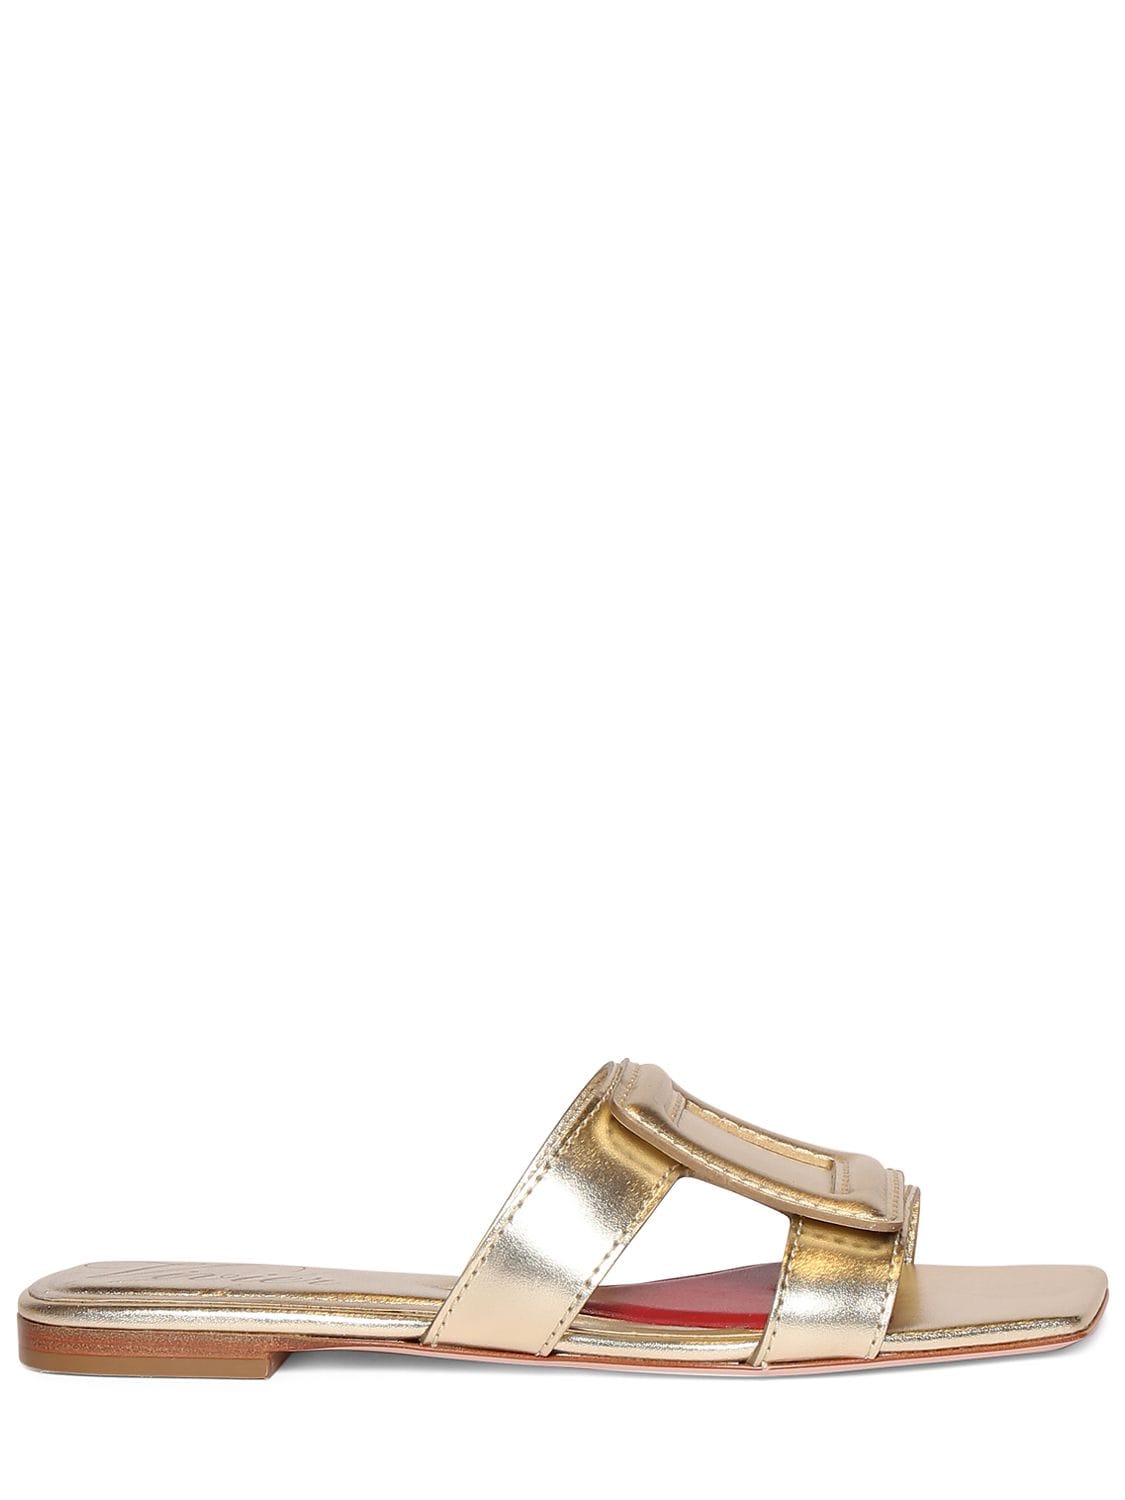 Image of 10mm Metallic Leather Flats Sandals